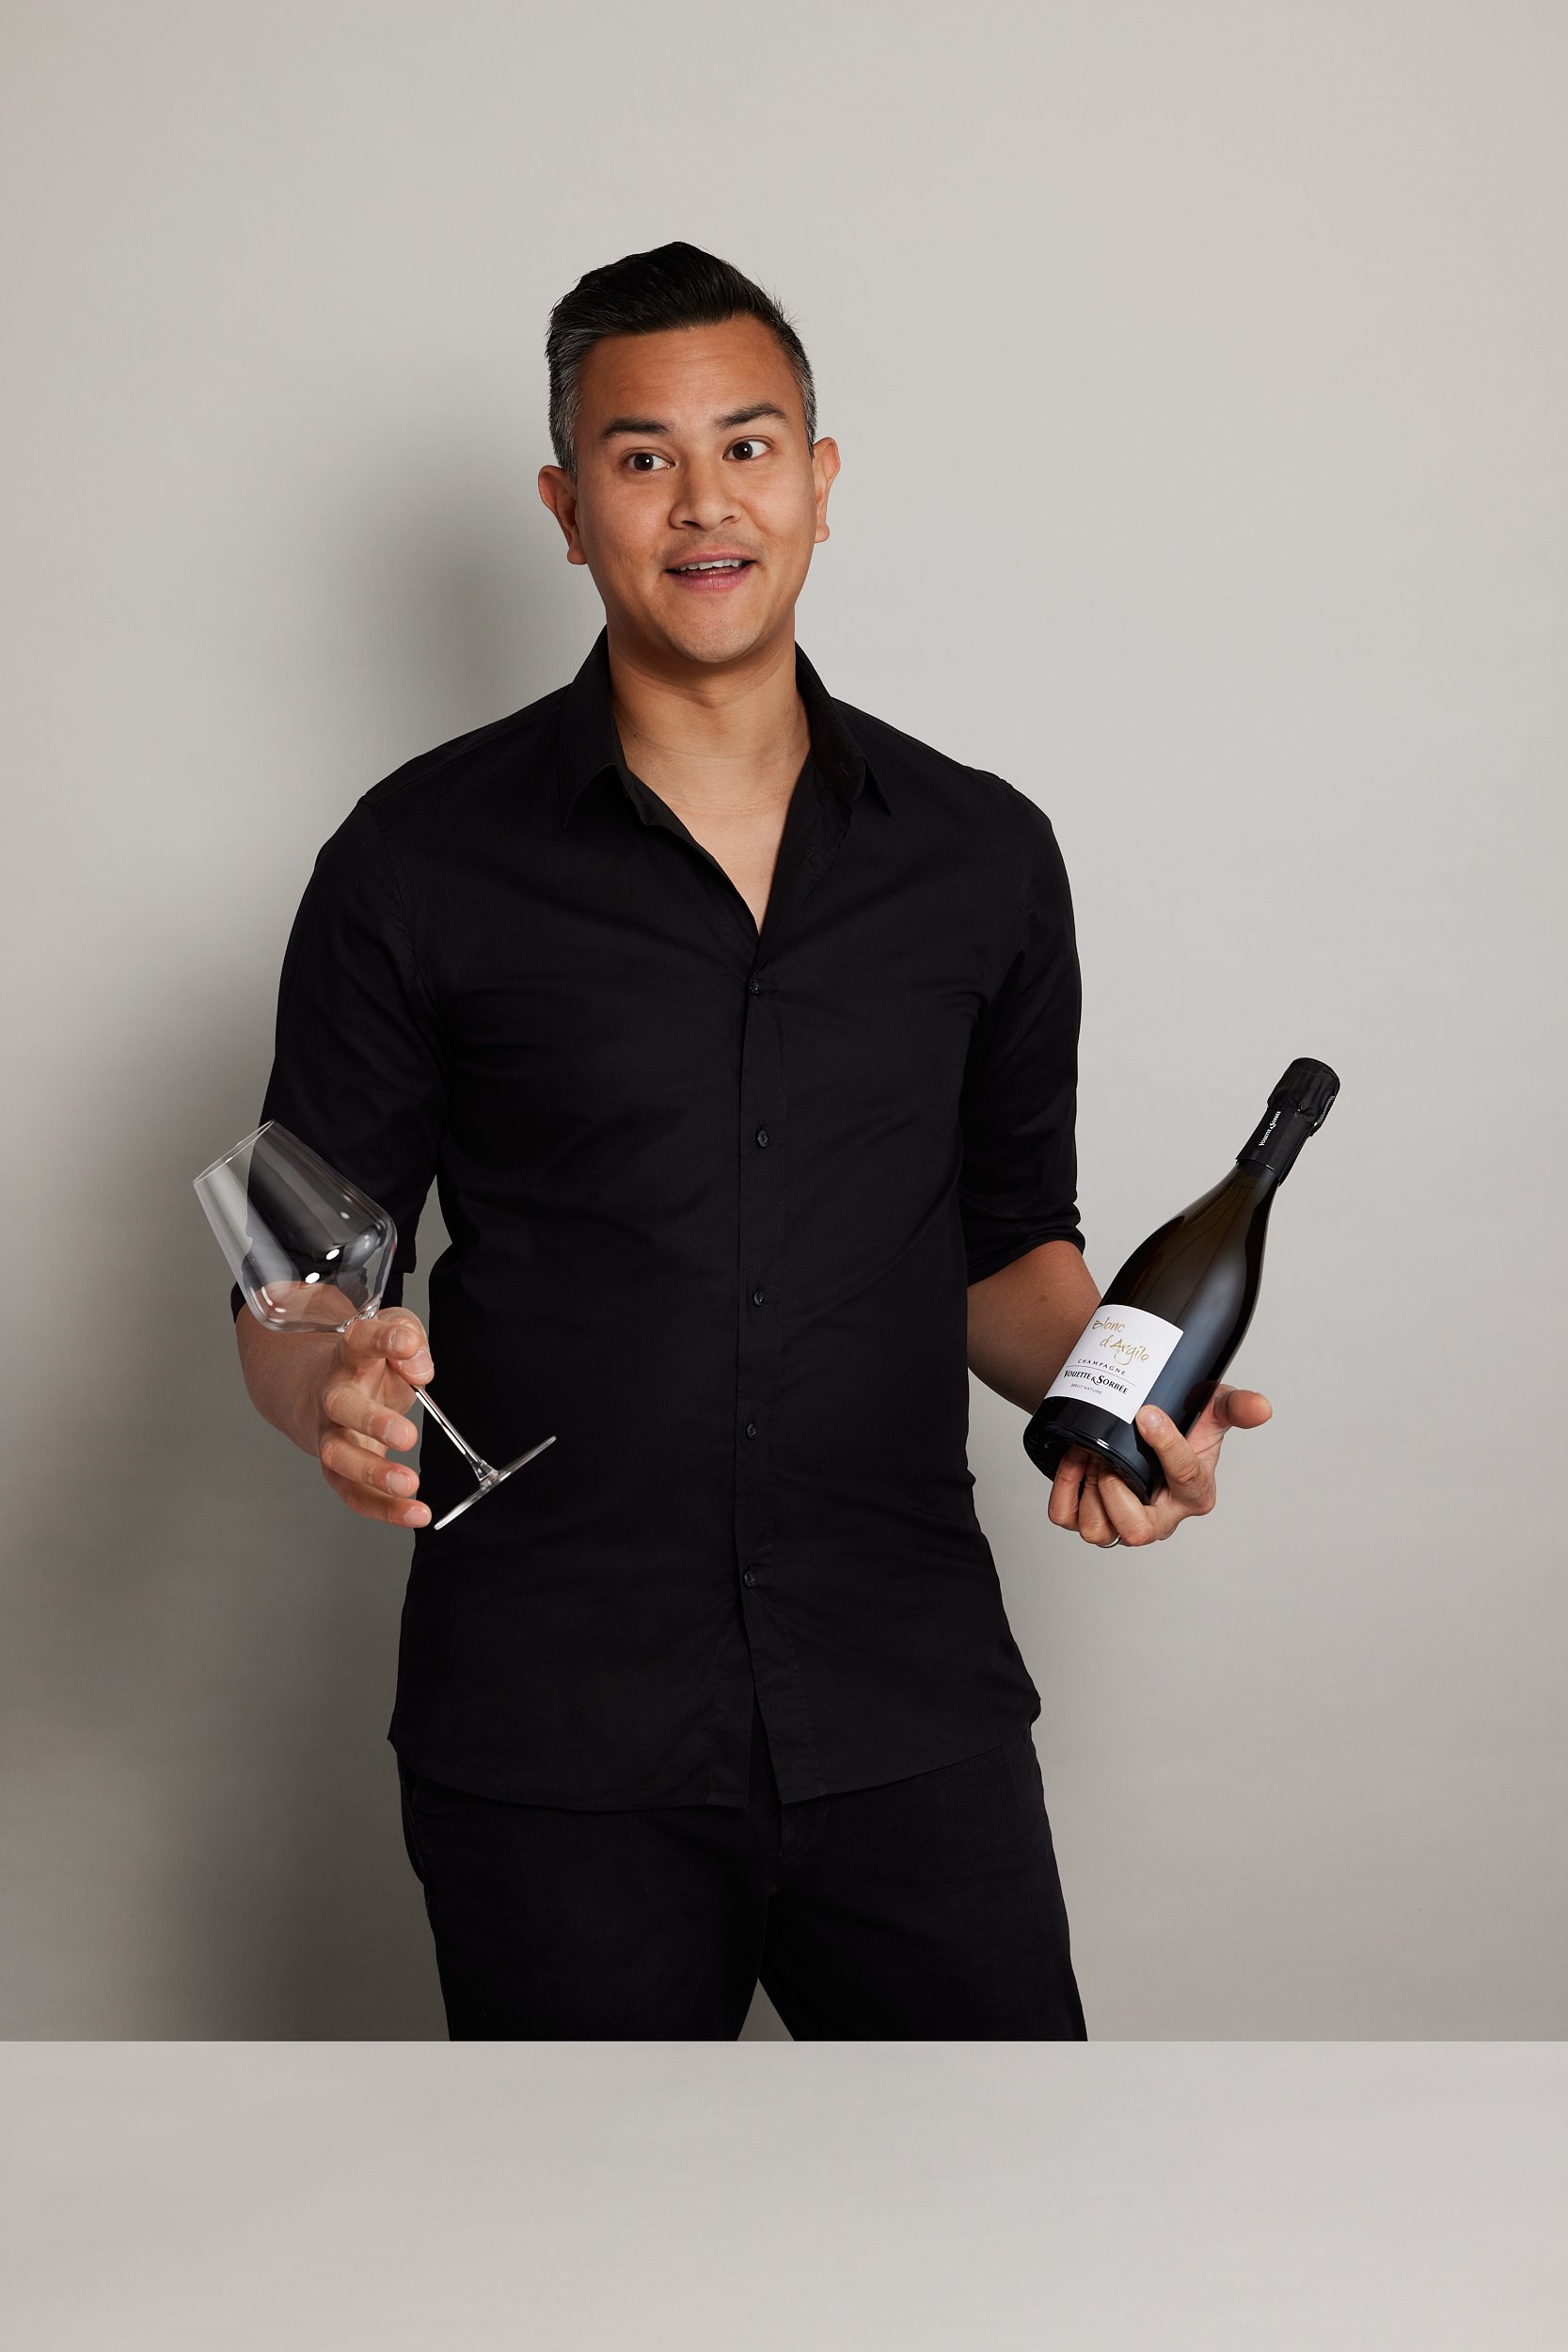 James Dossan of Curated Grapes holding a wine bottle and wine glass speaking off camera with photography by Sarah Anderson Photography.jpg